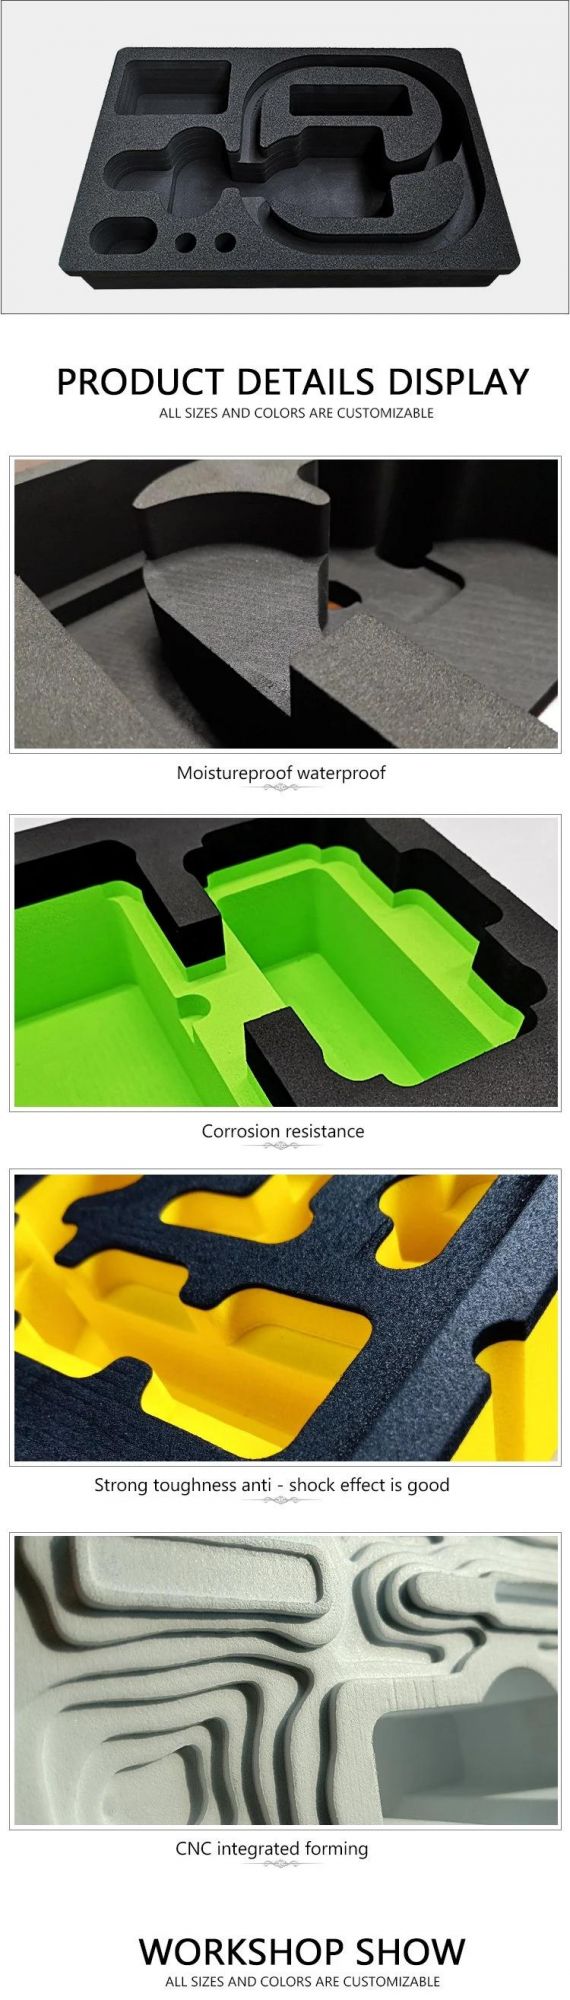 Customized CNC Cutting EVA Foam Insert for Packaging and Tool Kit